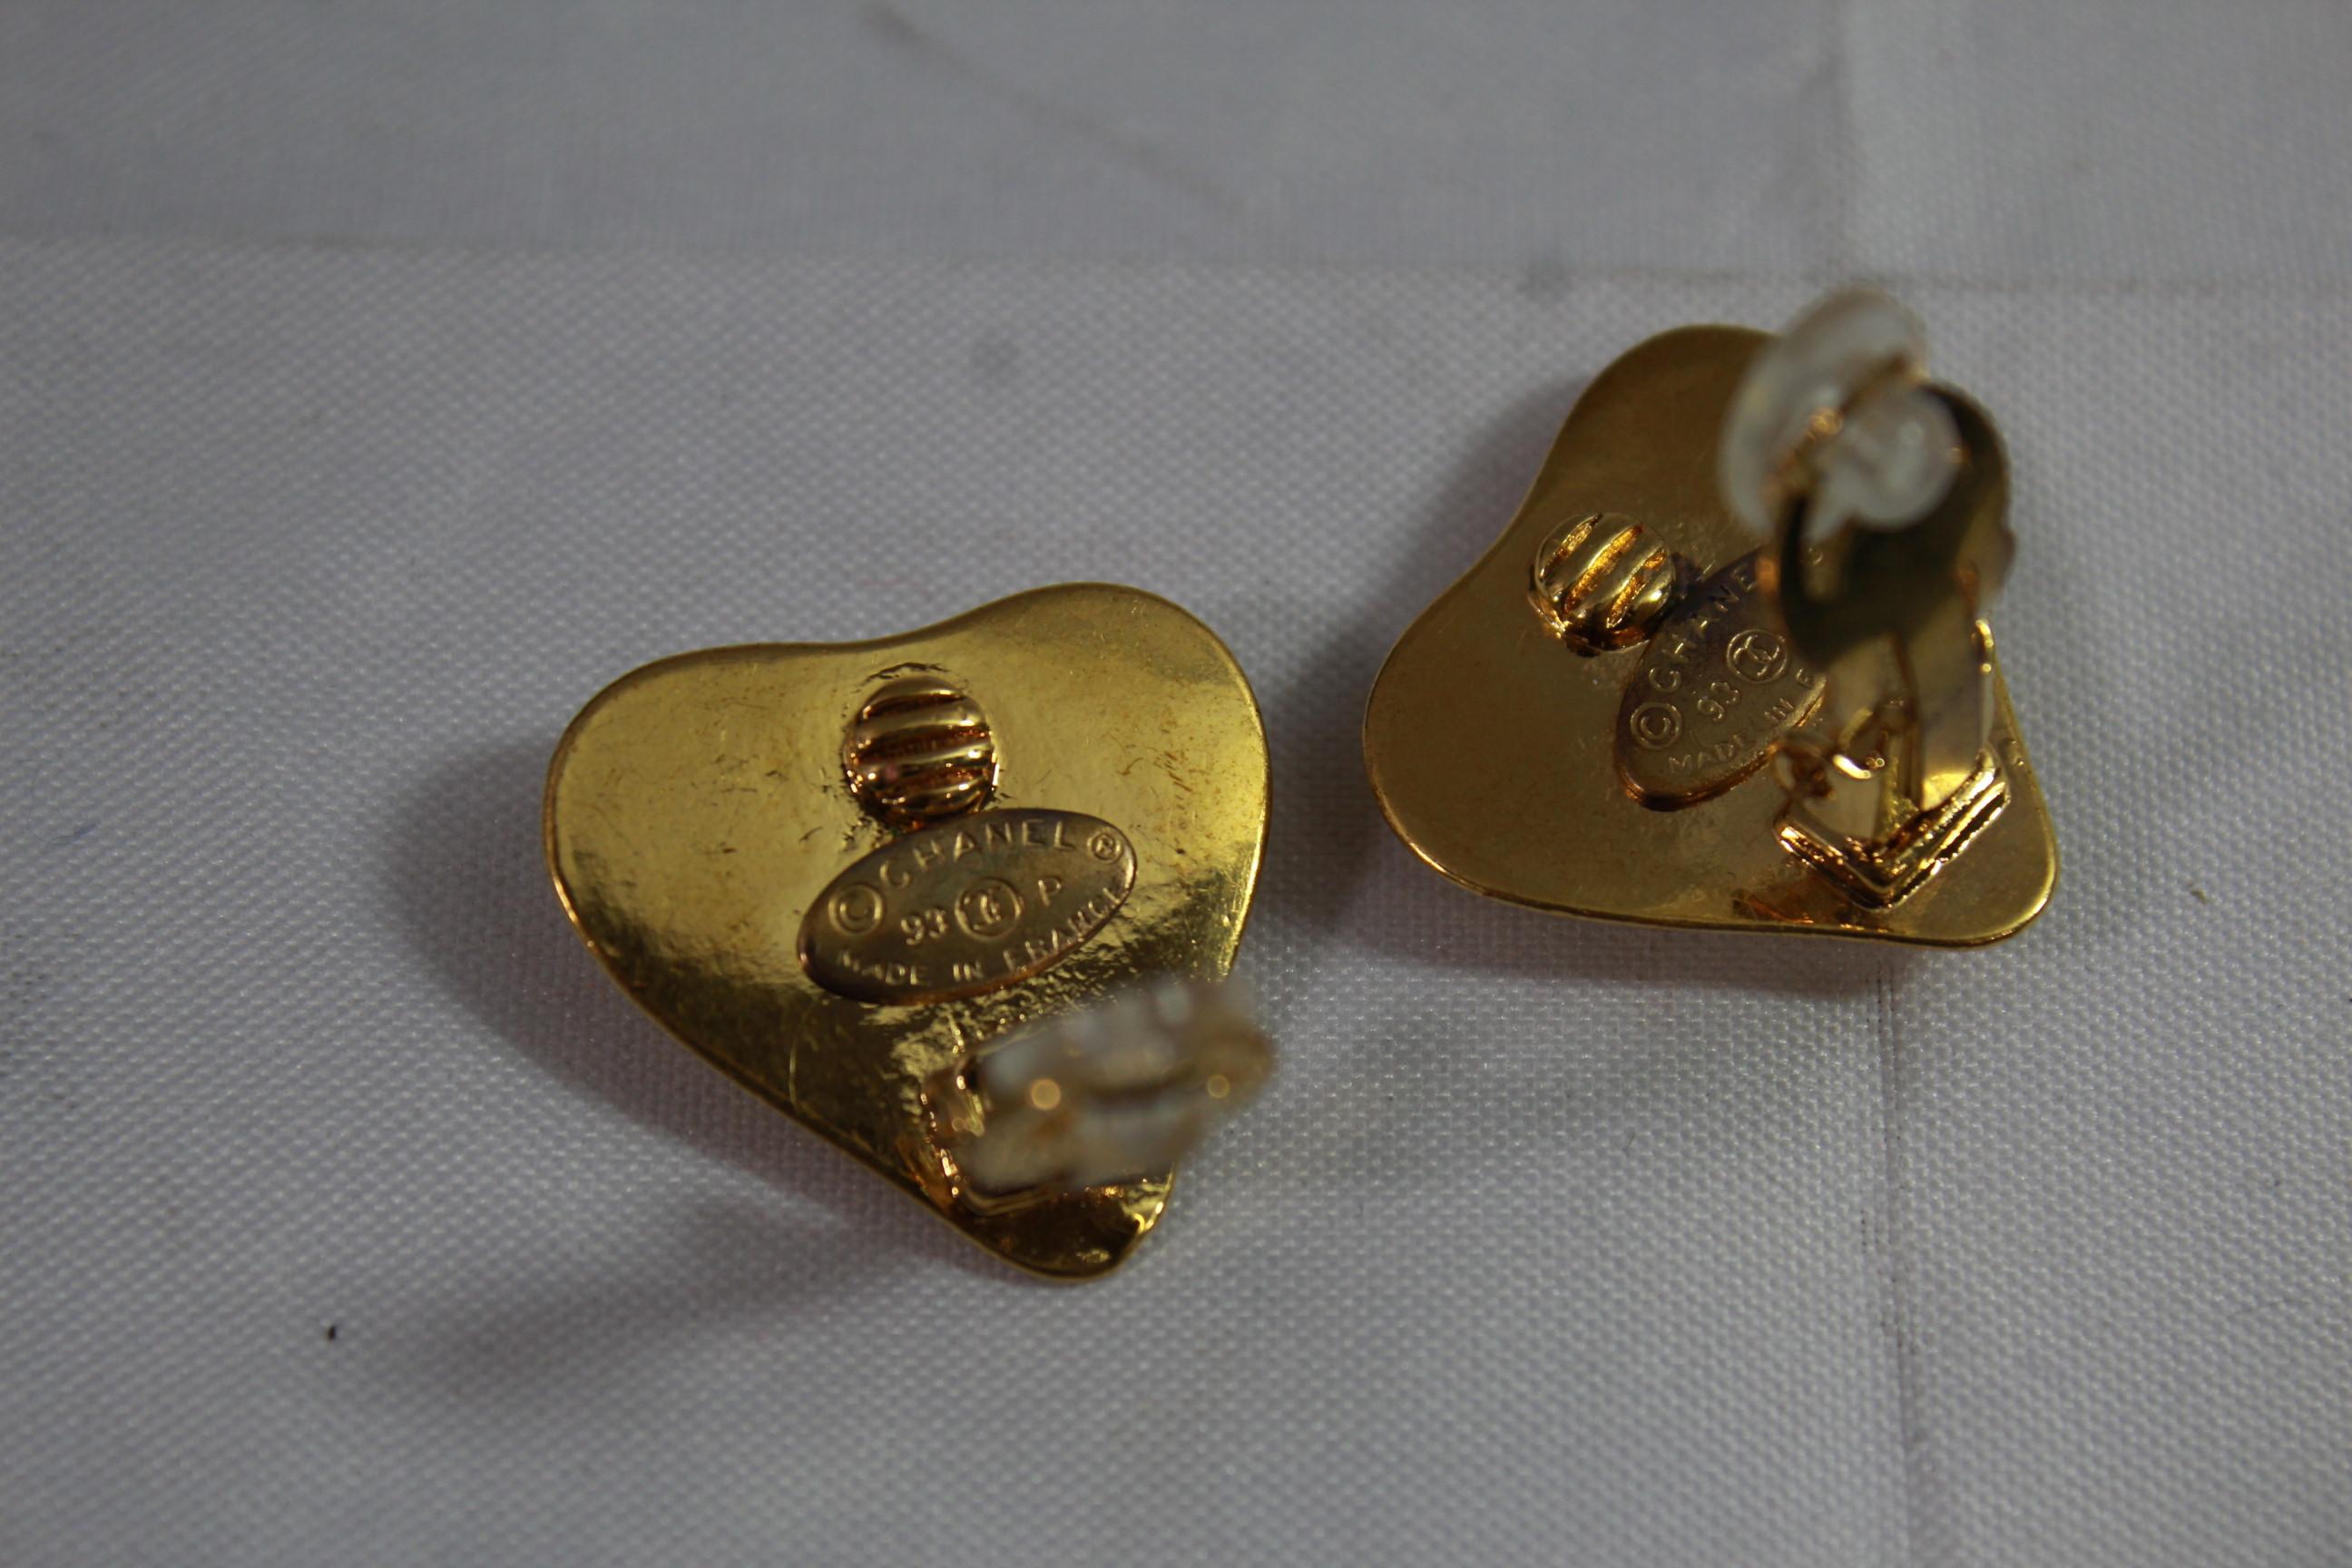 Vintage Chanel earrings in gold plated metal. 
Good vintage condition.
Size 2.6 cm
Clip system